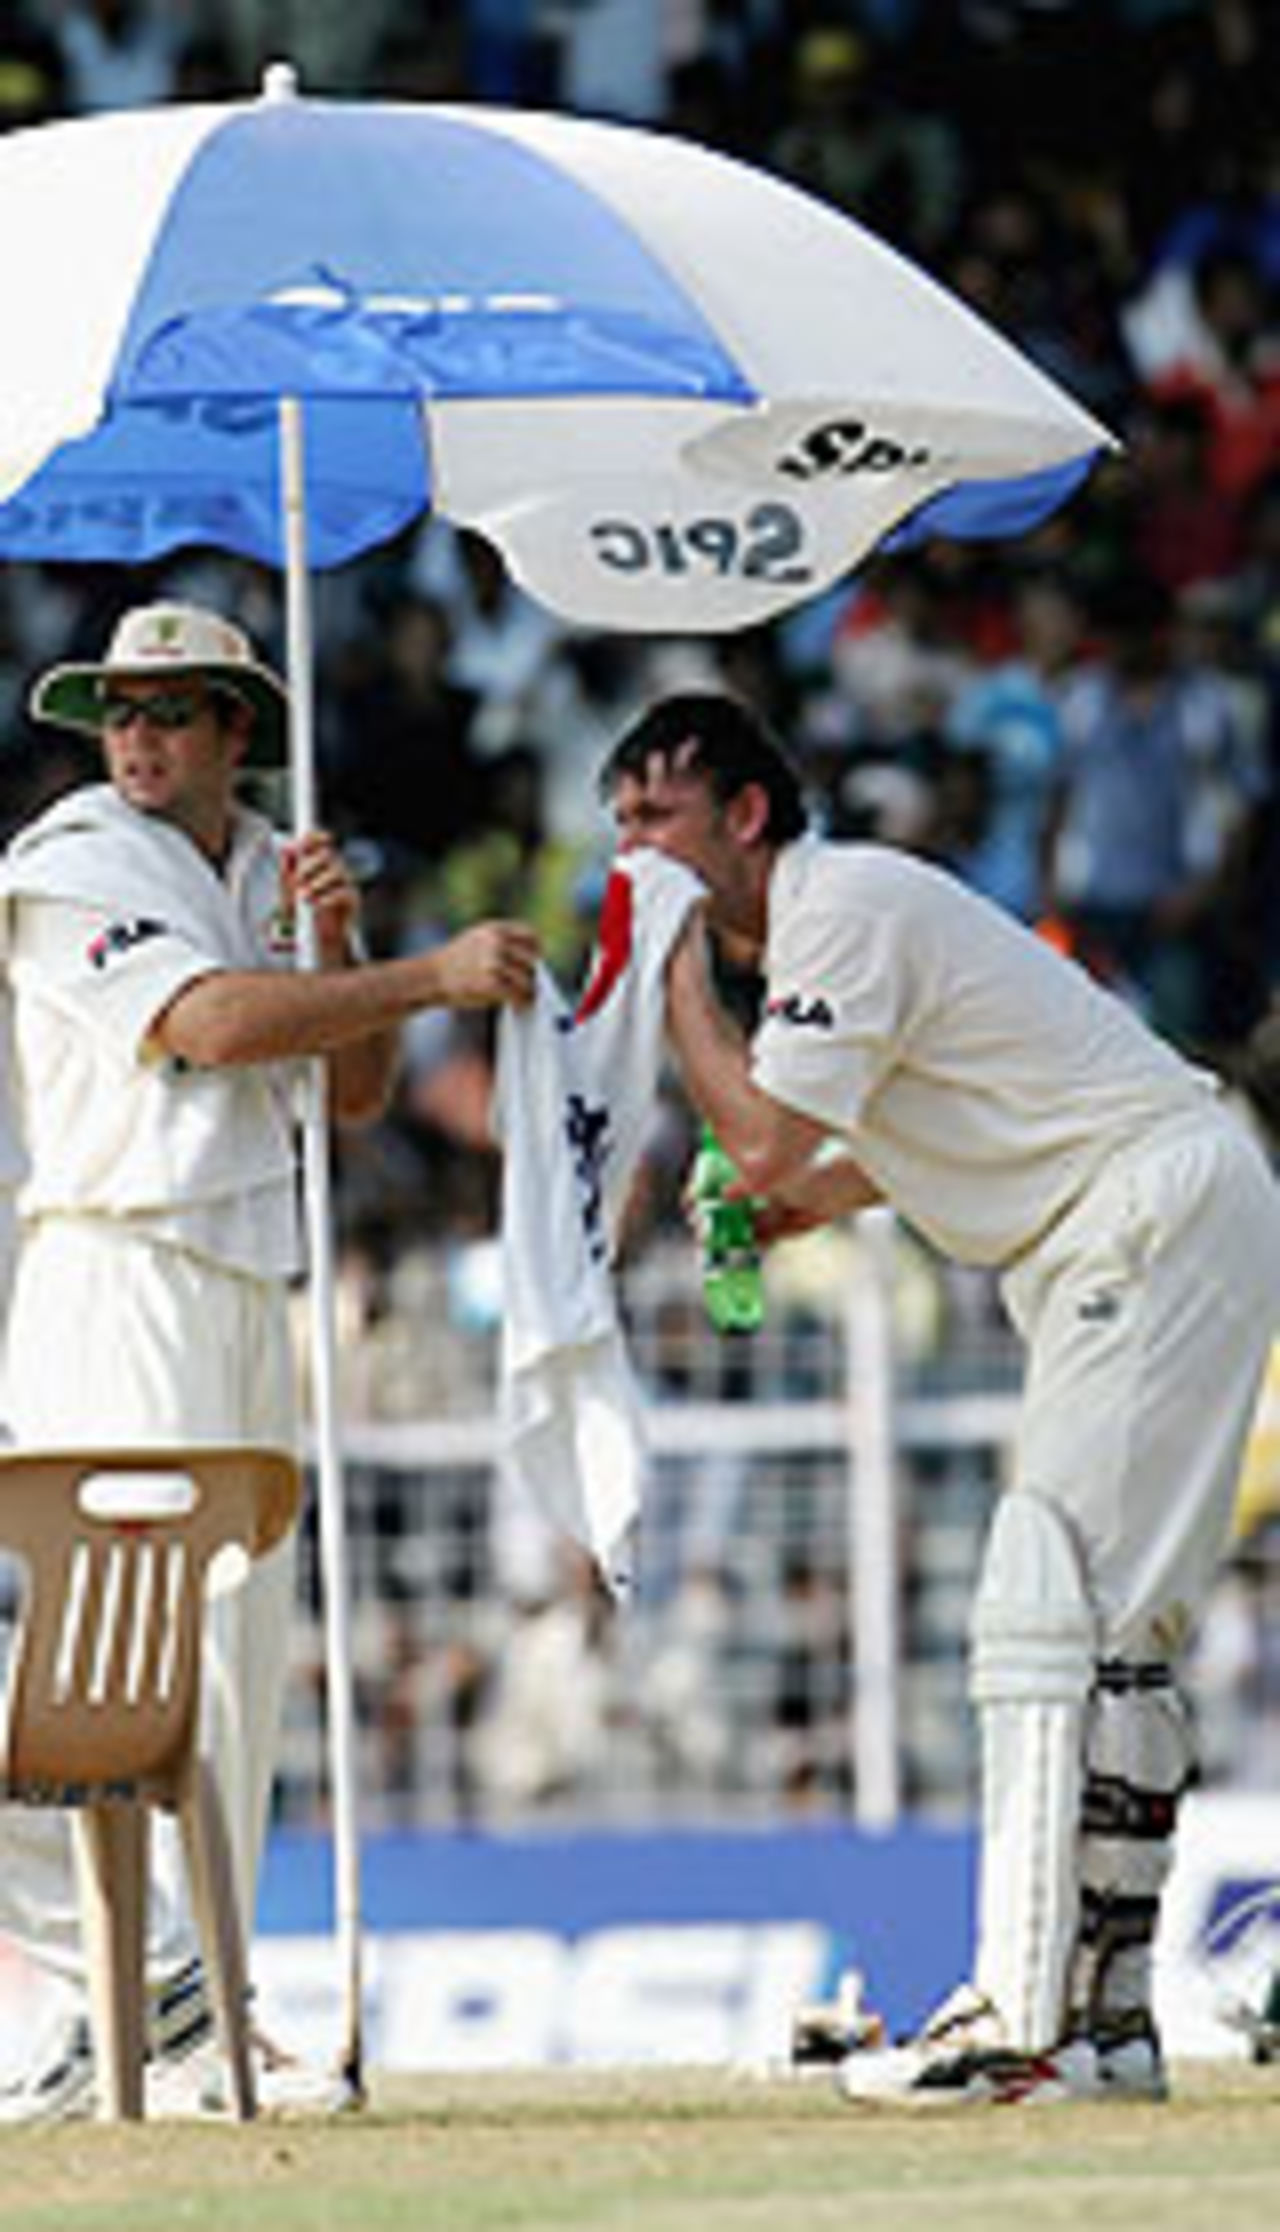 Adam Gilchrist cools off on a hot day, 2nd Test, Chennai, 3rd day, October 16, 2004